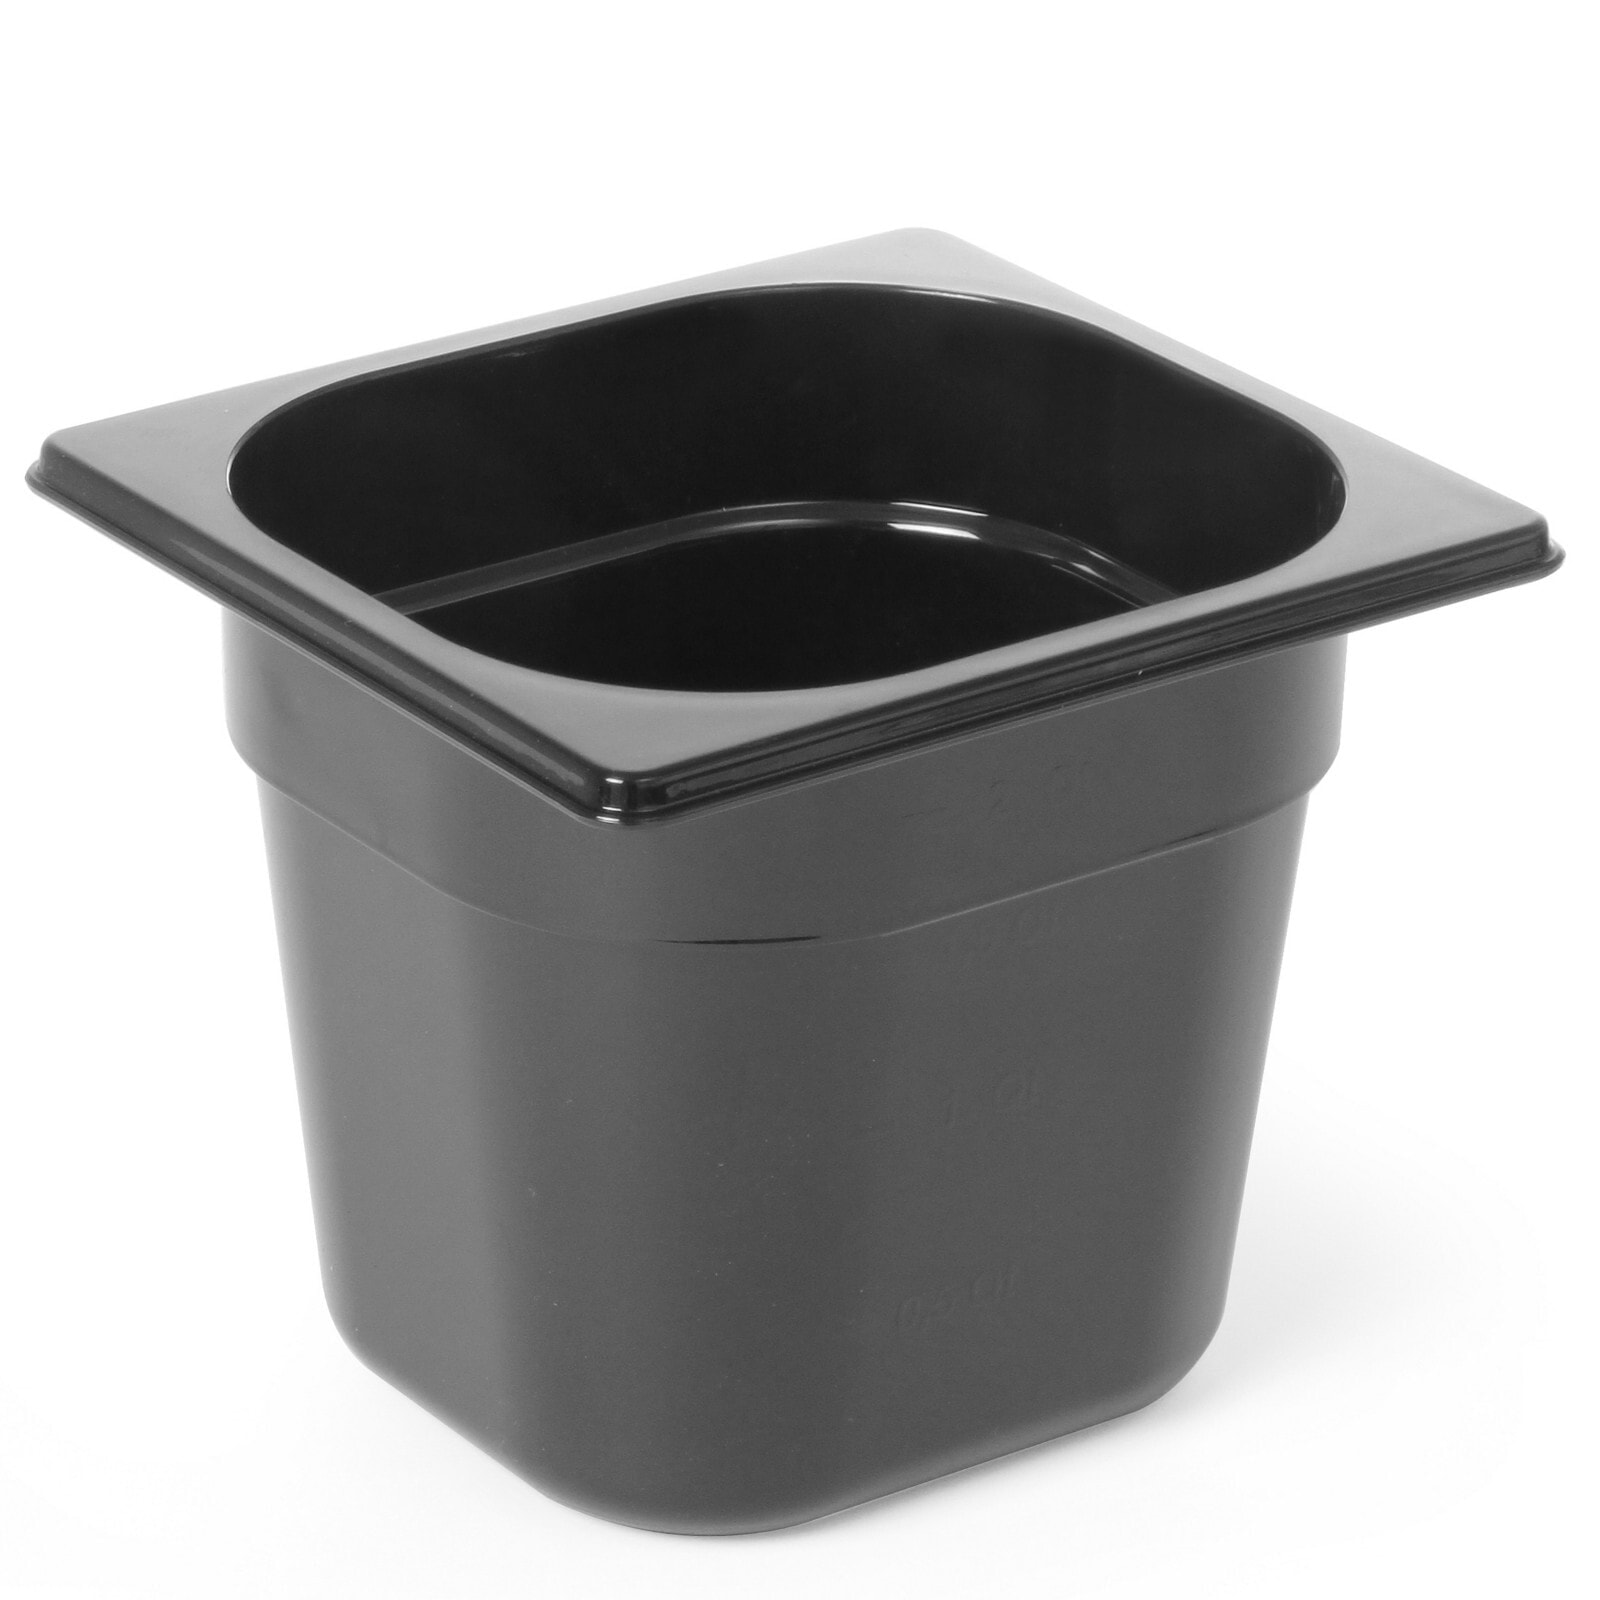 Black polycarbonate container GN 1/6, height 65 mm - Hendi 862735